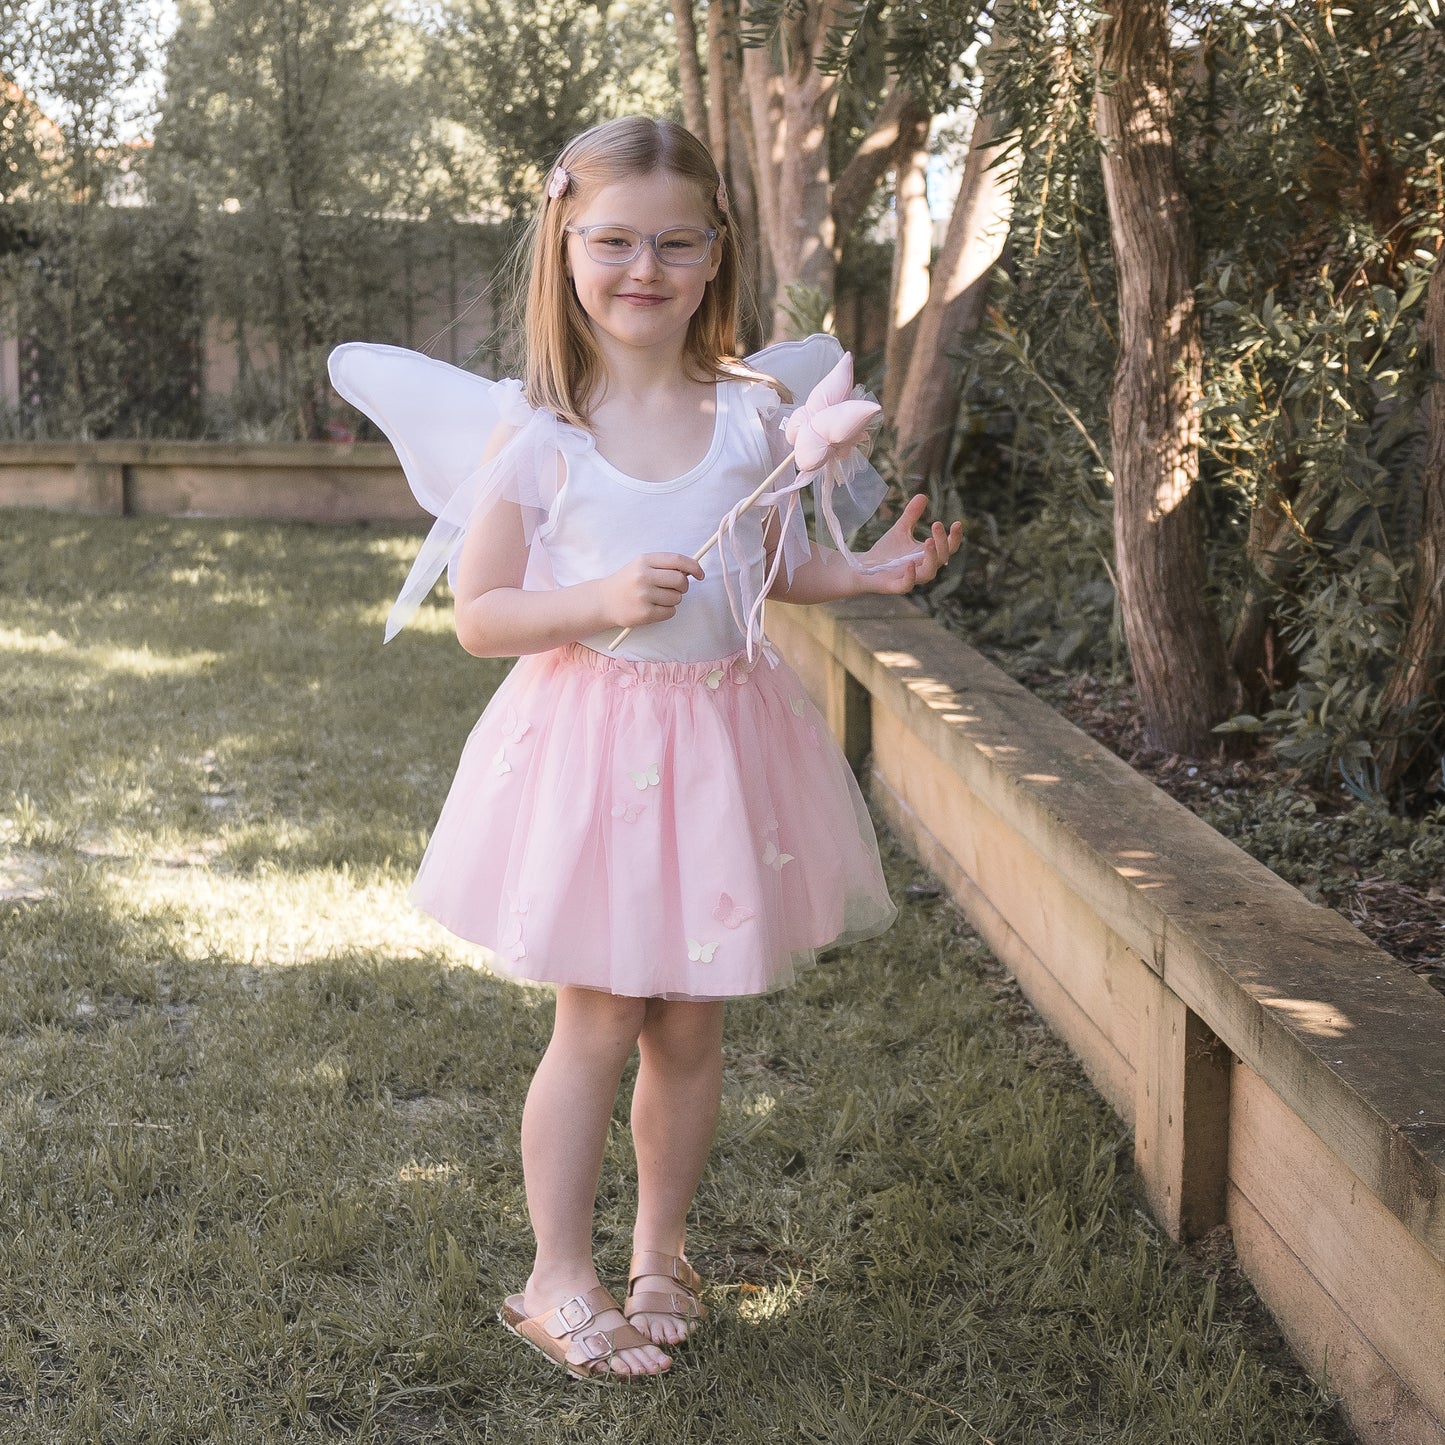 Butterfly Dreamer Tulle Skirt © - Baby Pink / Pastel or Sparkle Pink - Pre Order 6 week leadtime.